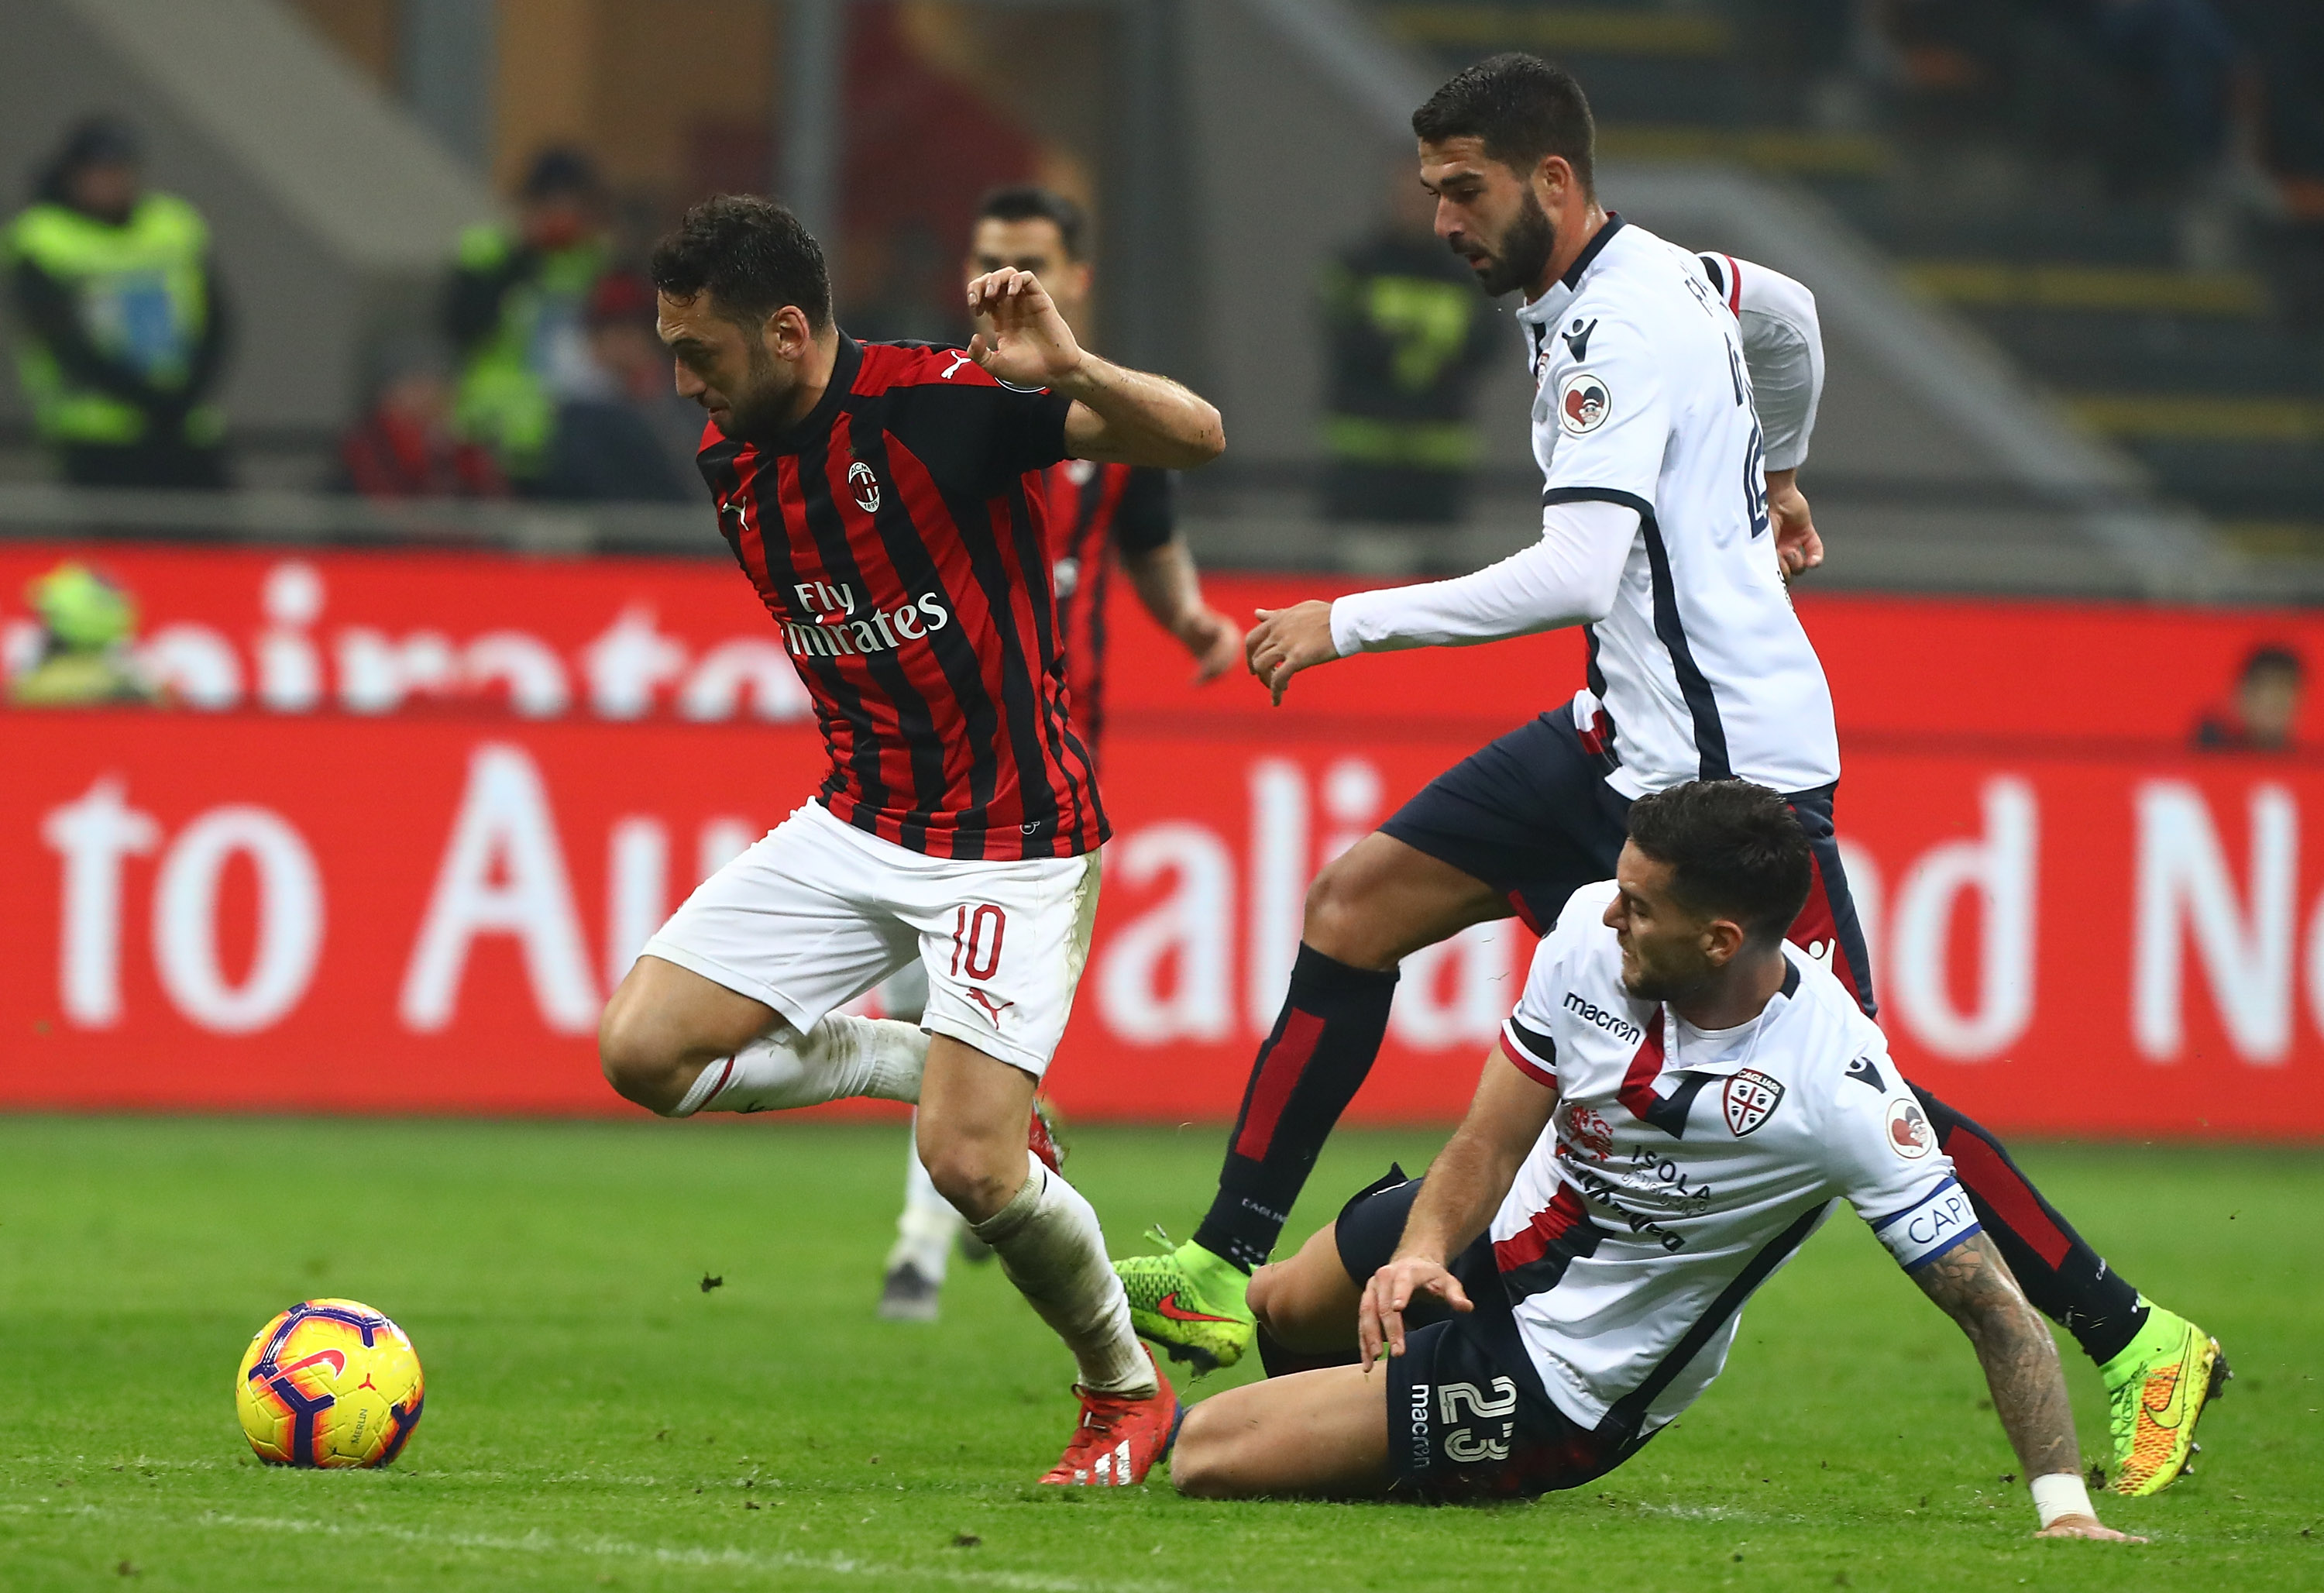 MILAN, ITALY - FEBRUARY 10: Hakan Calhanoglu of AC Milan competes for the ball with Luca Ceppitelli of Cagliari Calcio during the Serie A match between AC Milan and Cagliari at Stadio Giuseppe Meazza on February 10, 2019 in Milan, Italy. (Photo by Marco Luzzani/Getty Images)